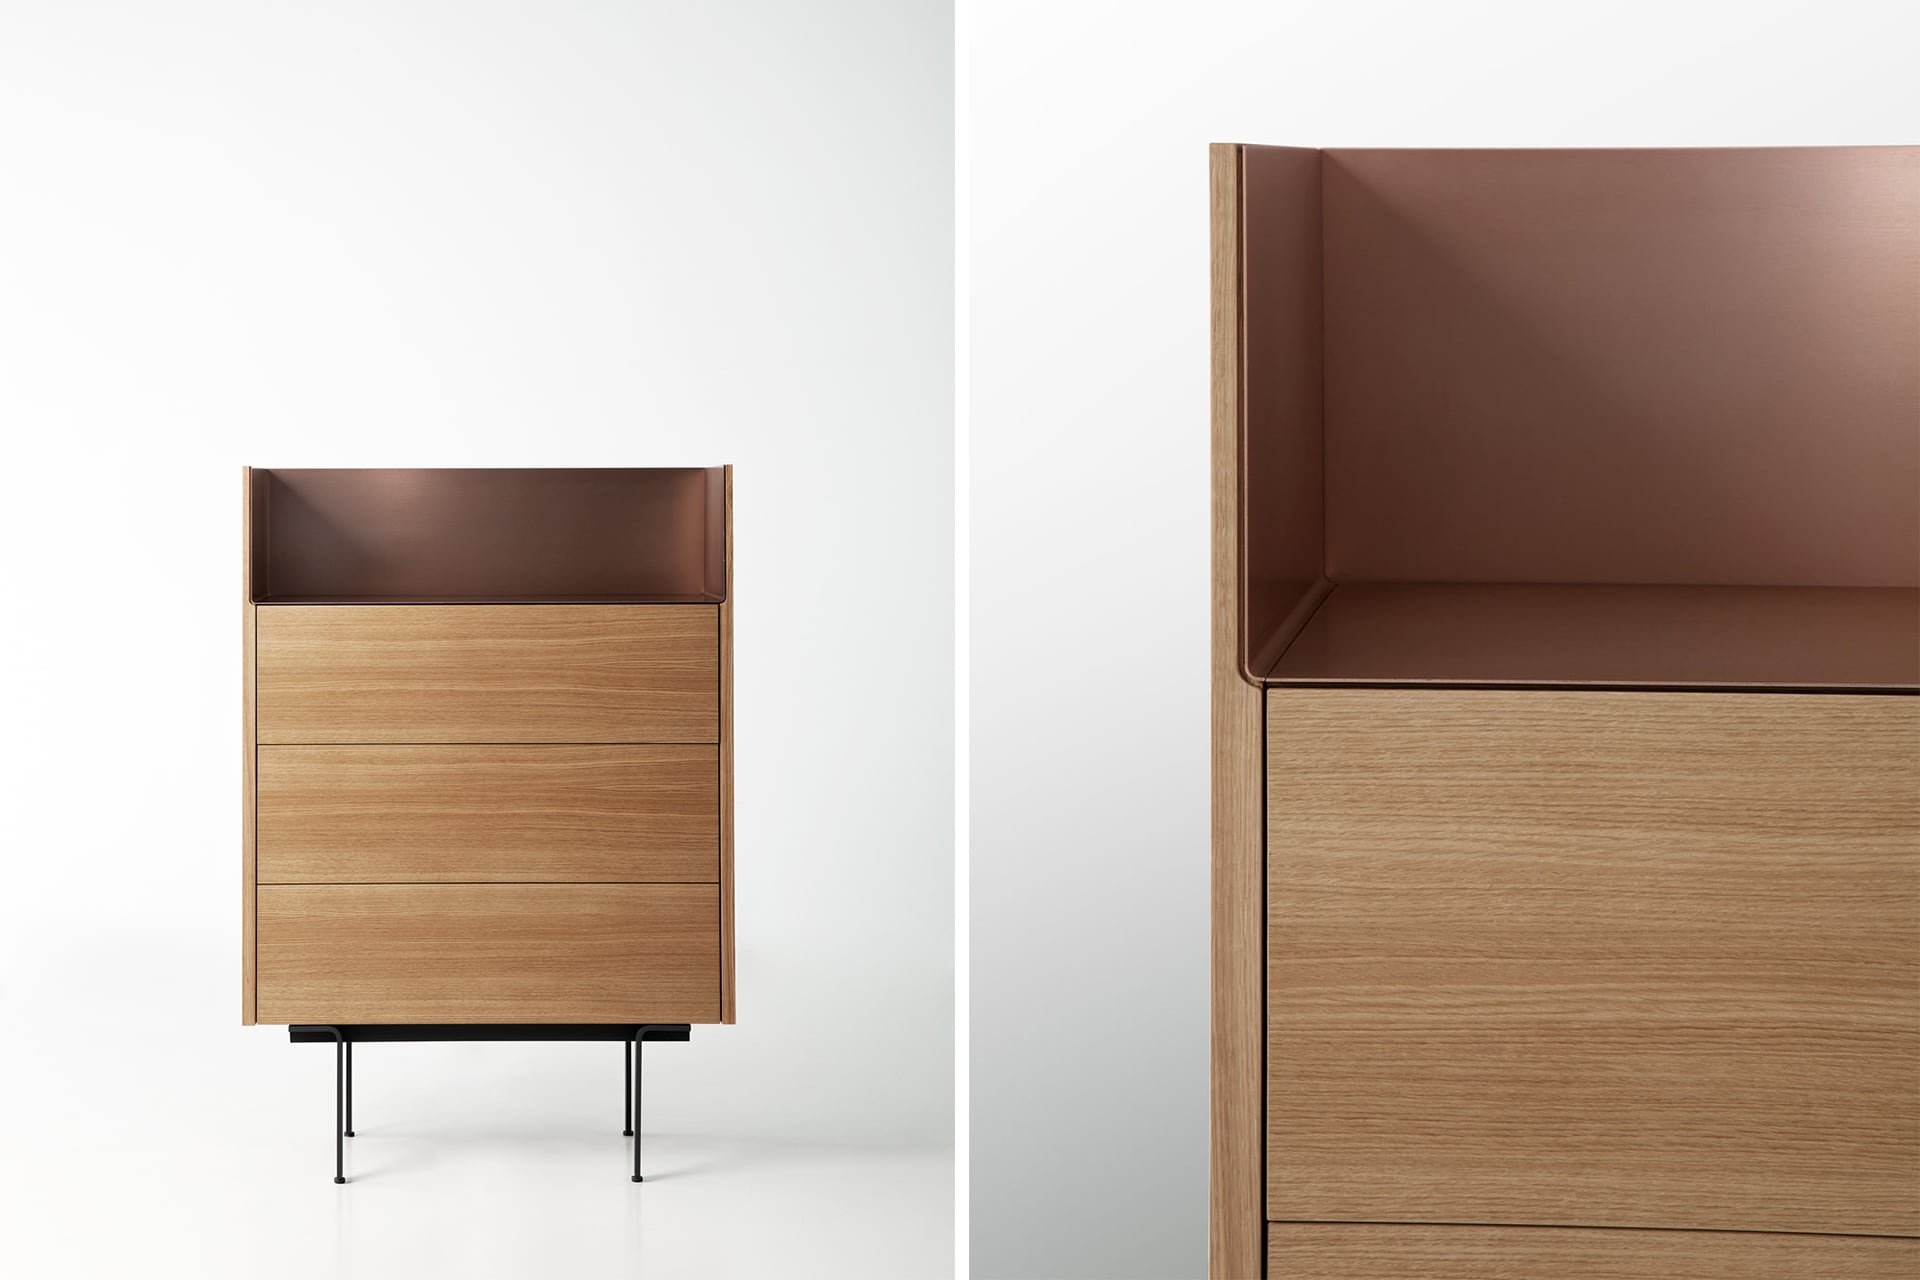 Stockholm Chest of Drawers from Punt Mobles, designed by Mario Ruiz